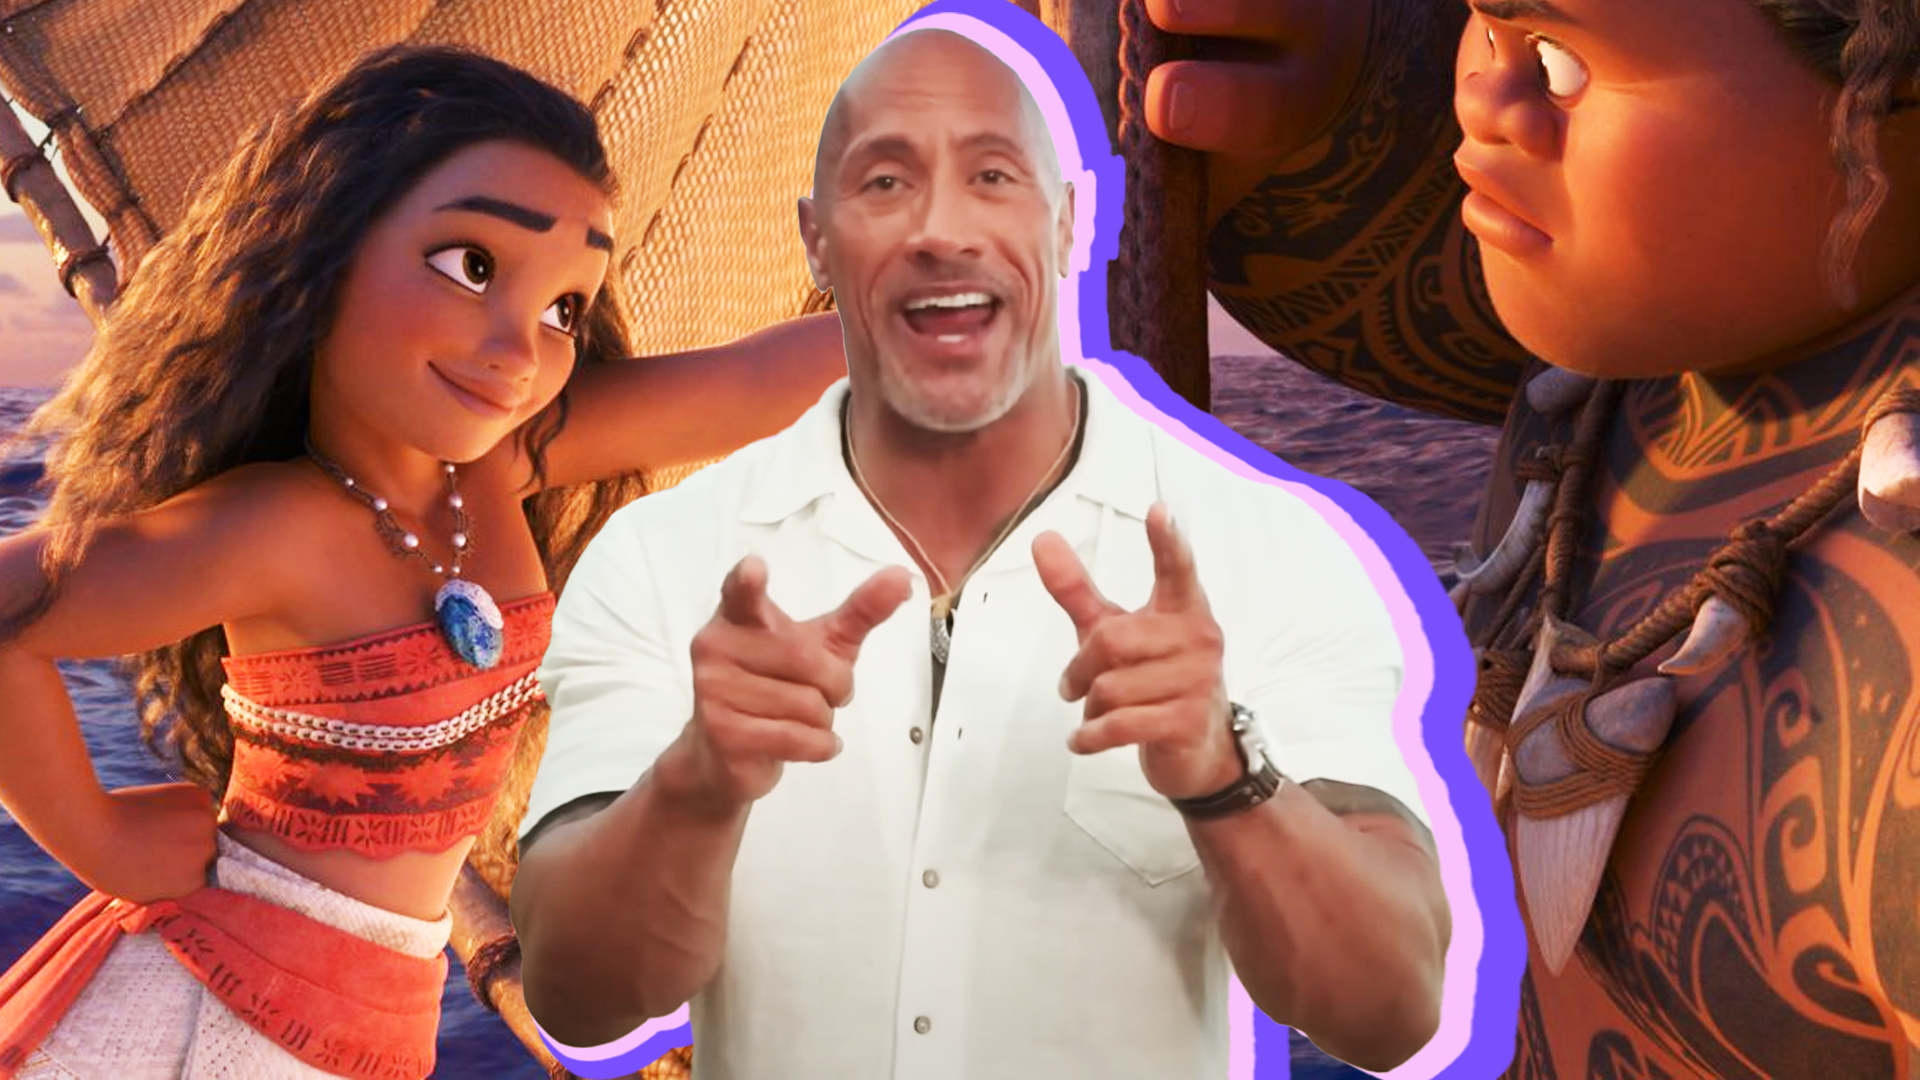 Disney Announce A Live-Action 'Moana' Movie With The Rock Returning As Maui